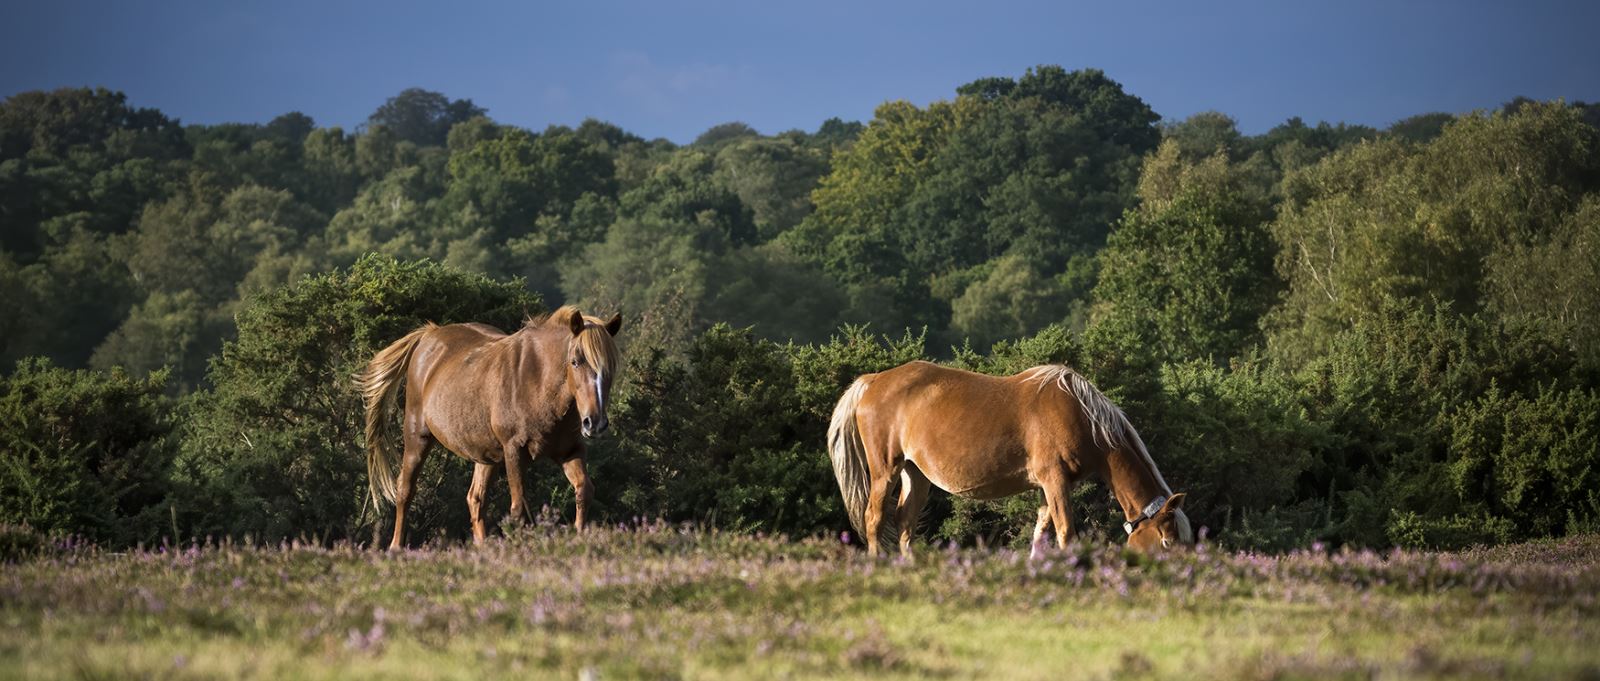 New Forest Ponies in the New Forest National Park, Hampshire